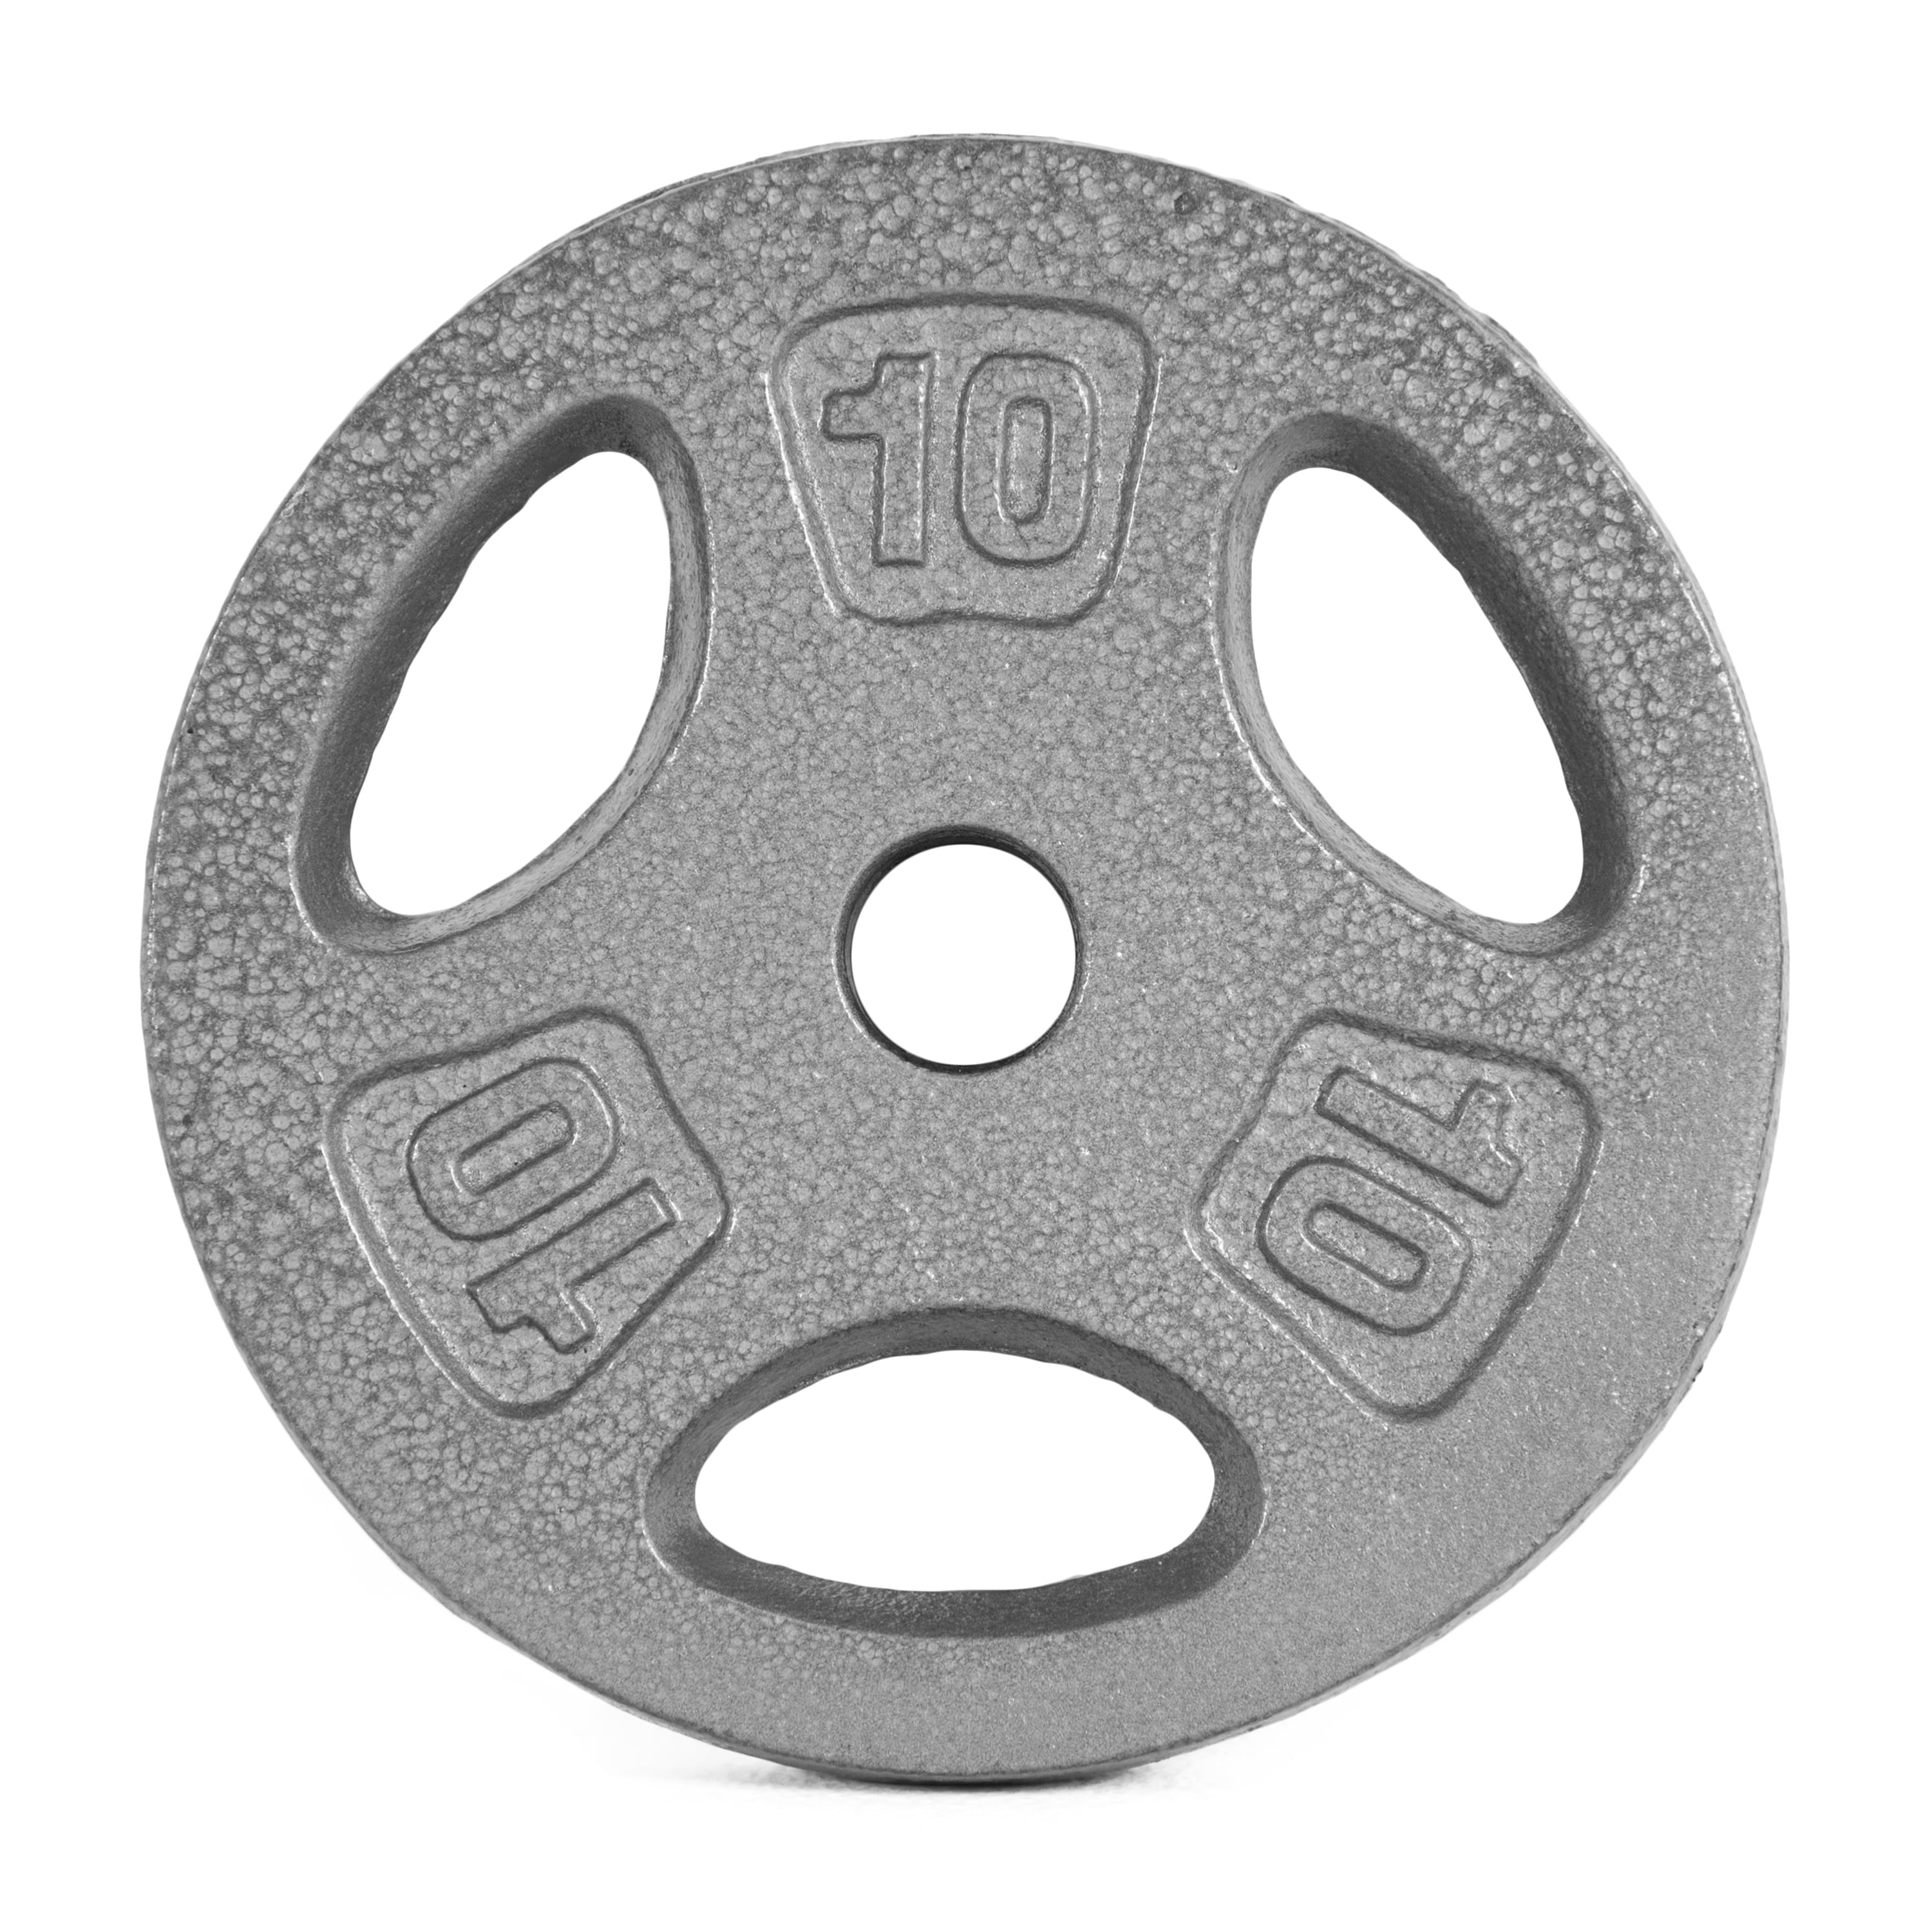 10 5 Weight 2.5 or 25lb Pound Cast Iron Standard 1" plates and bars 